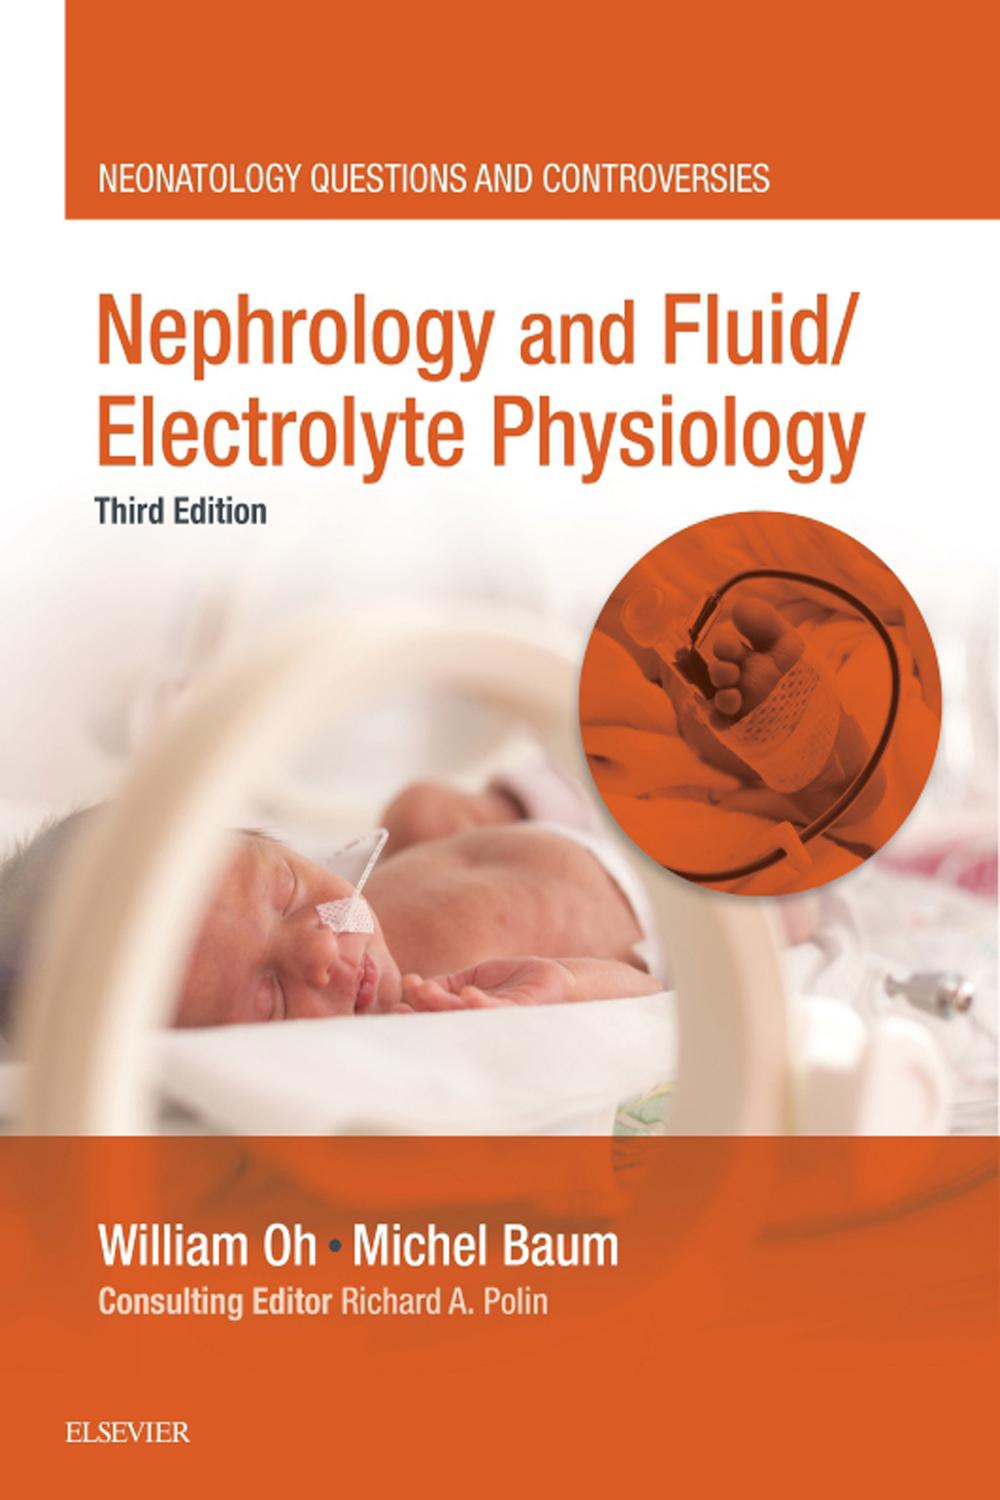 Nephrology and Fluid/Electrolyte Physiology - William Oh